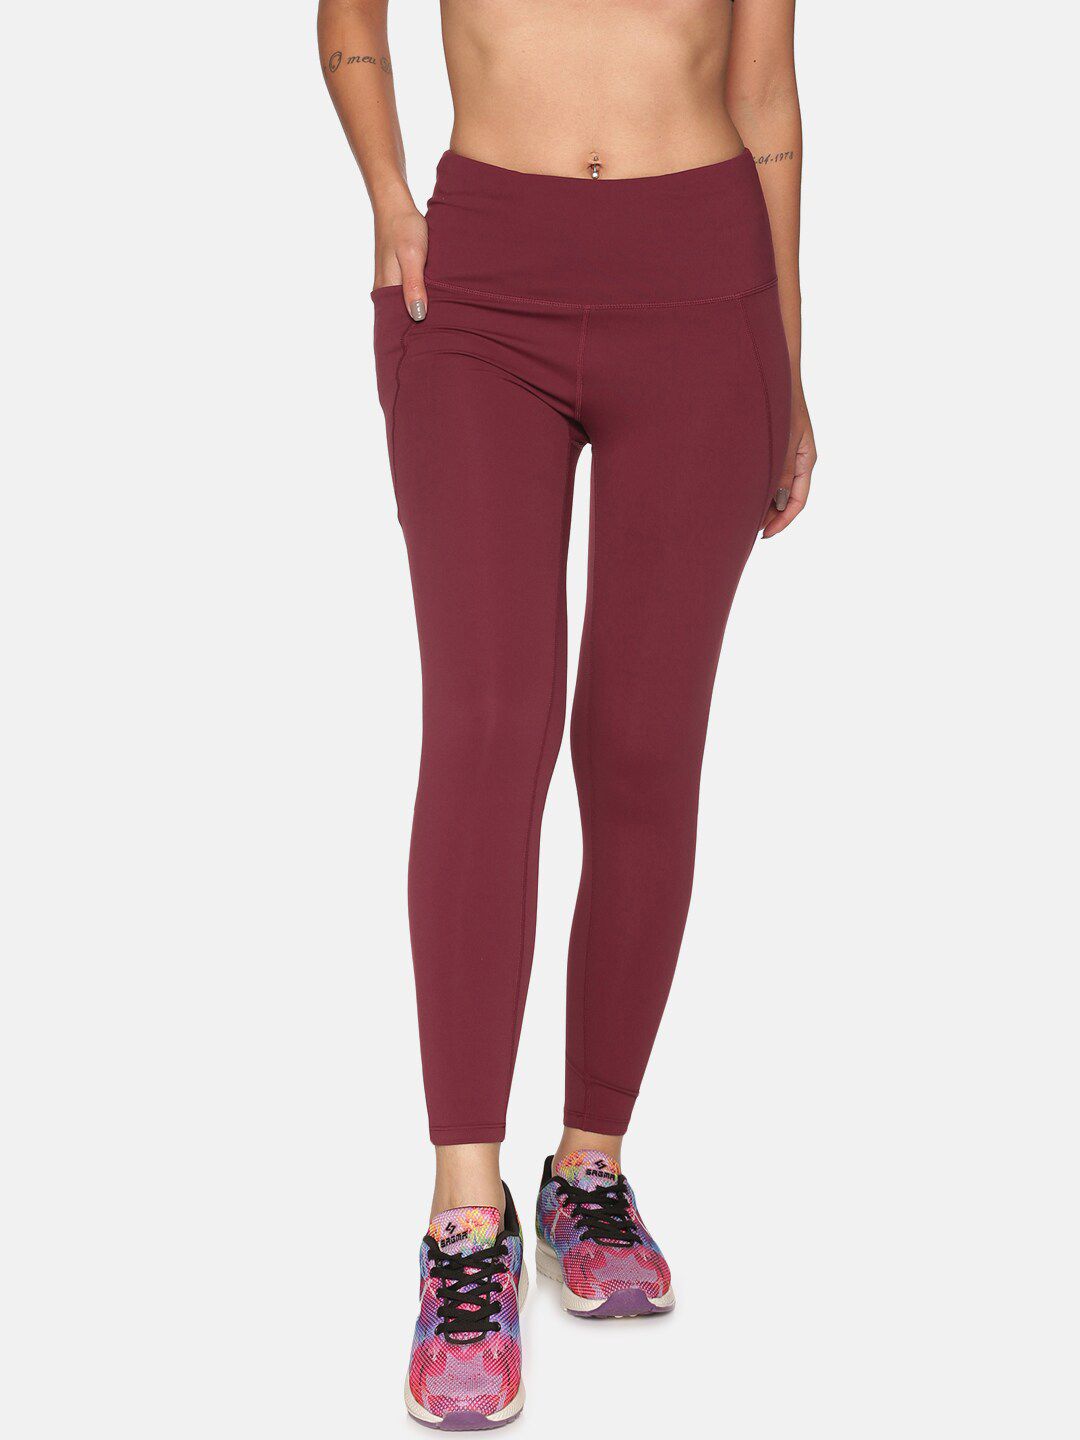 BlissClub Women Burgundy Super Stretchy and High Waisted The Ultimate Leggings Price in India